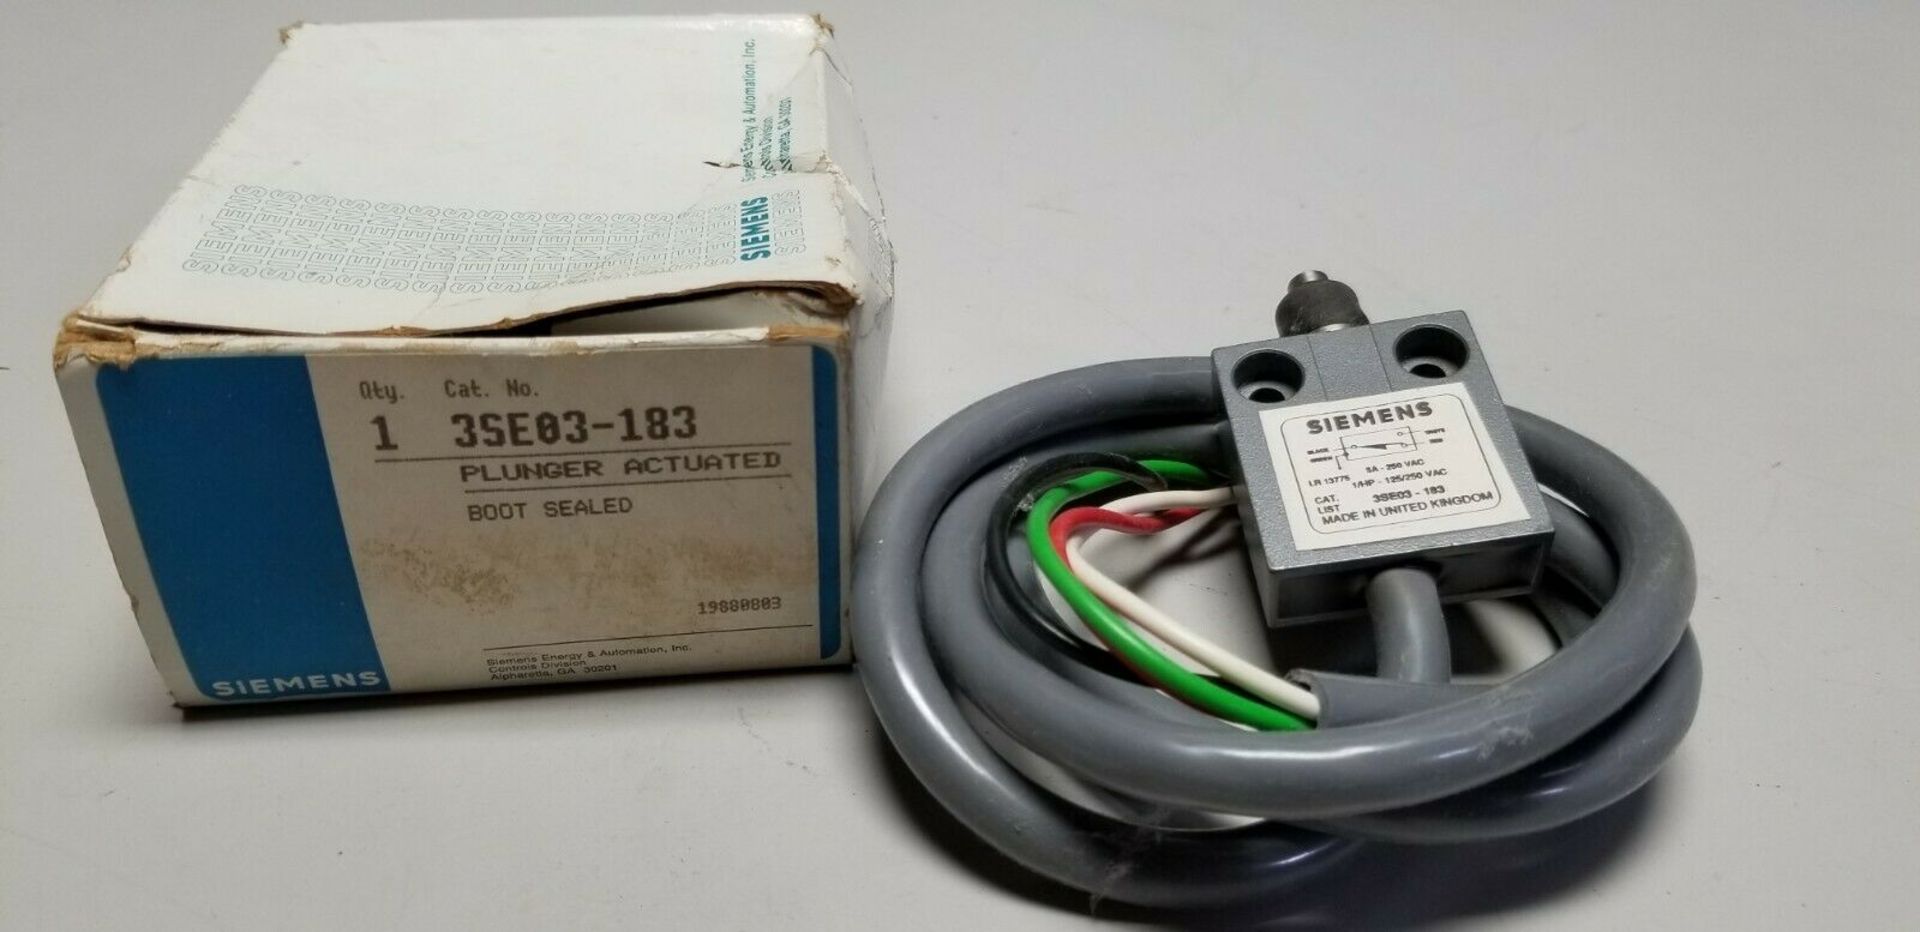 New Siemens Plunger Actuated Boot Sealed Limit Switch